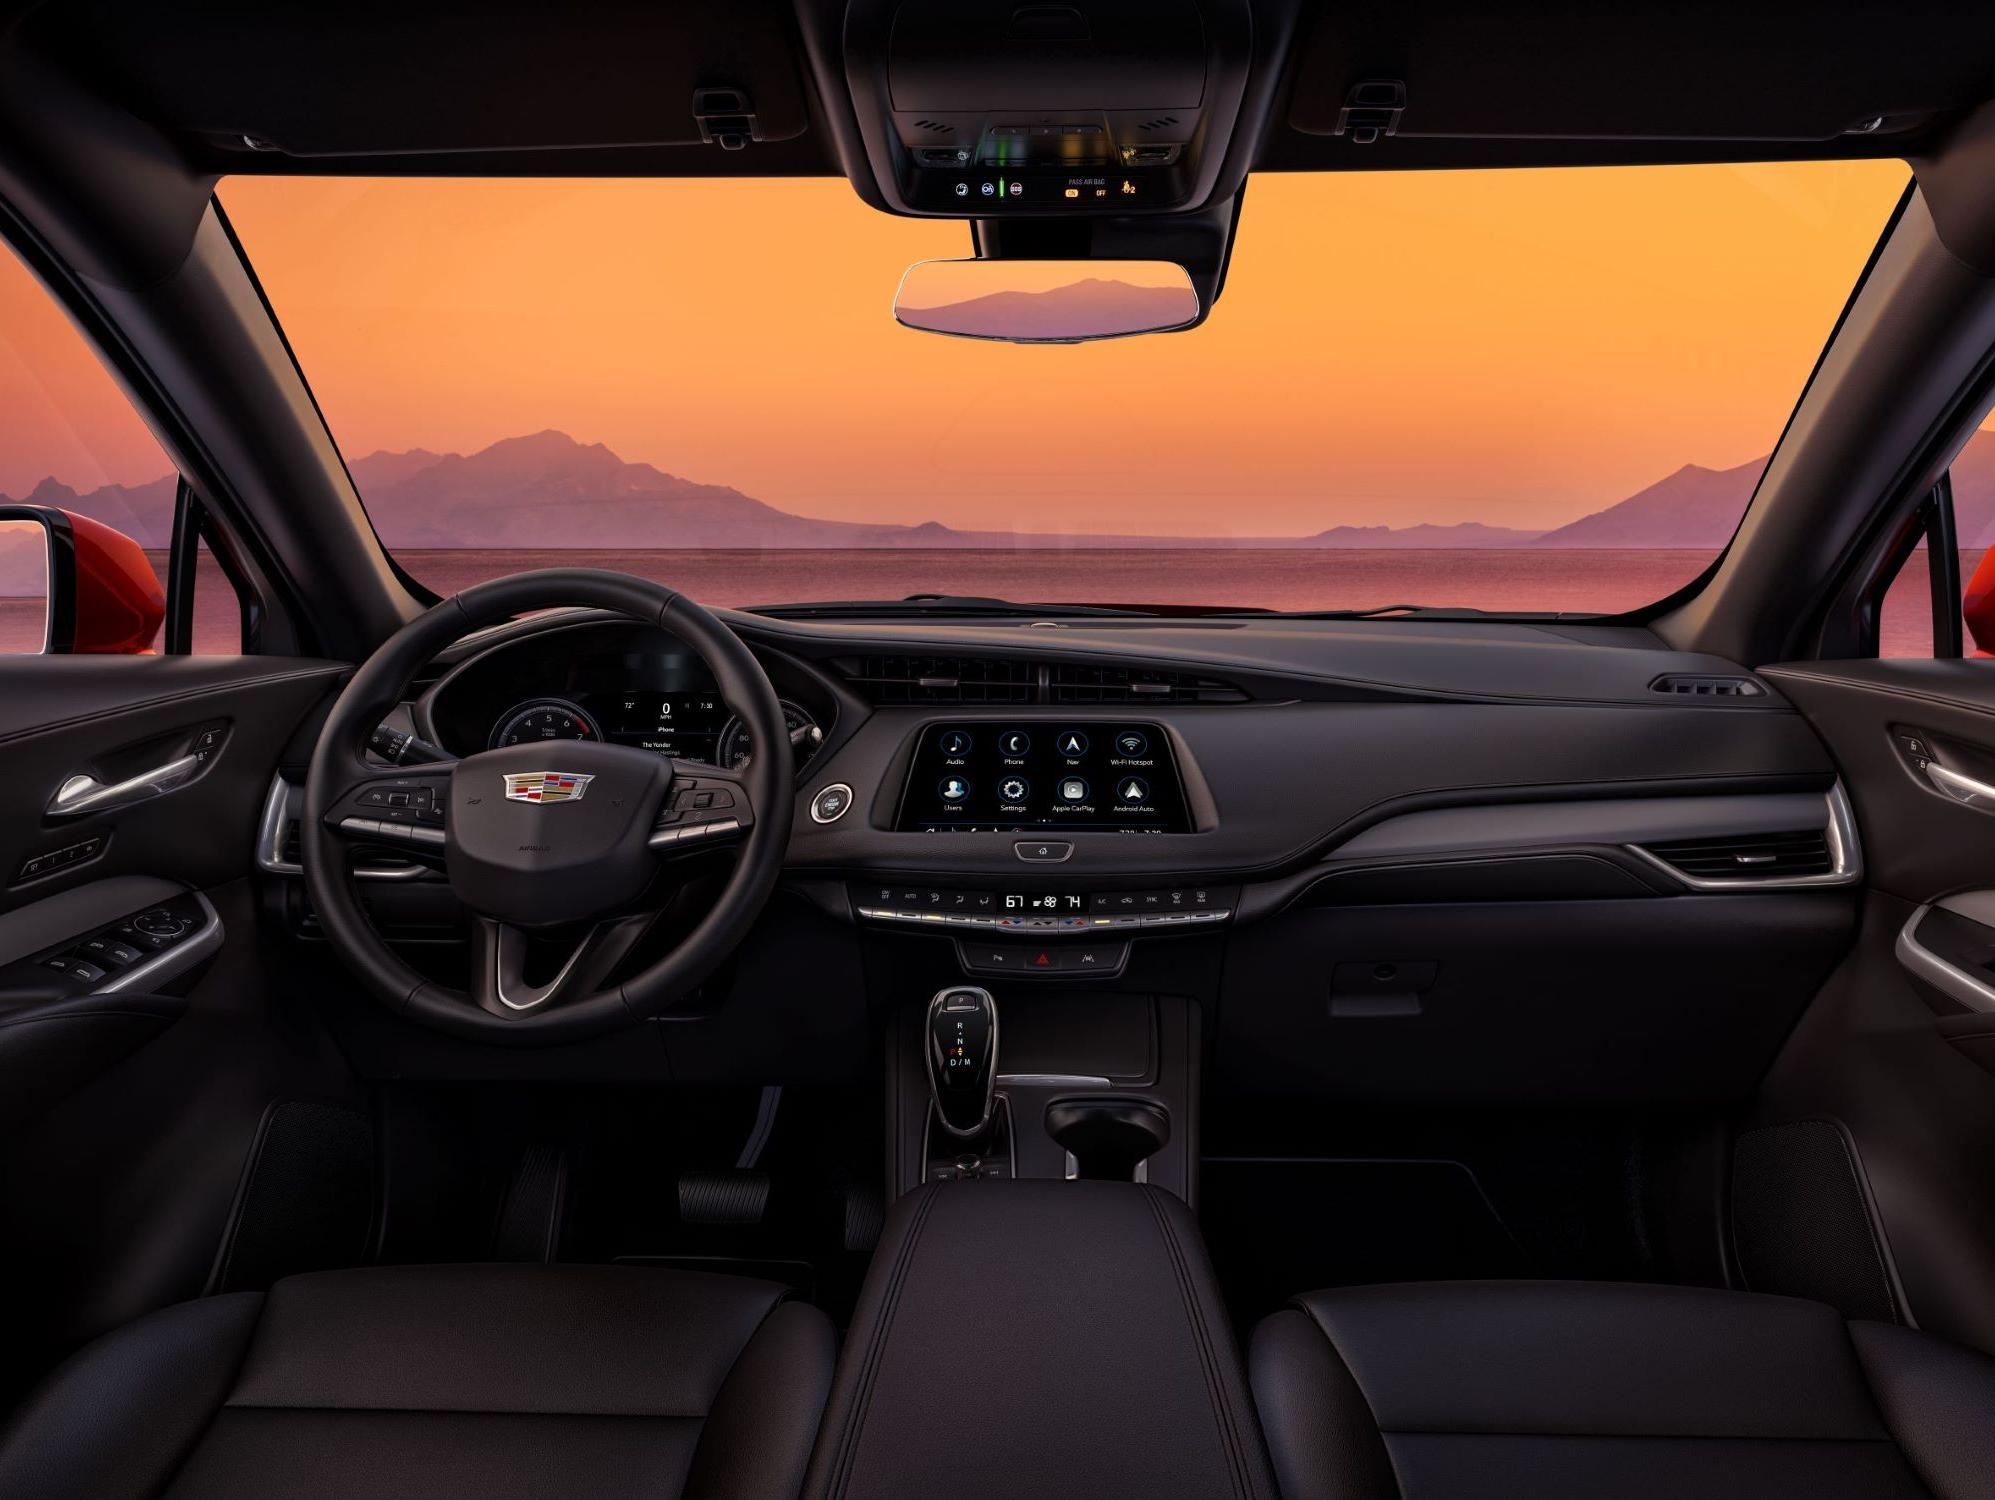 Interior of a 2023 Cadillac during sunset